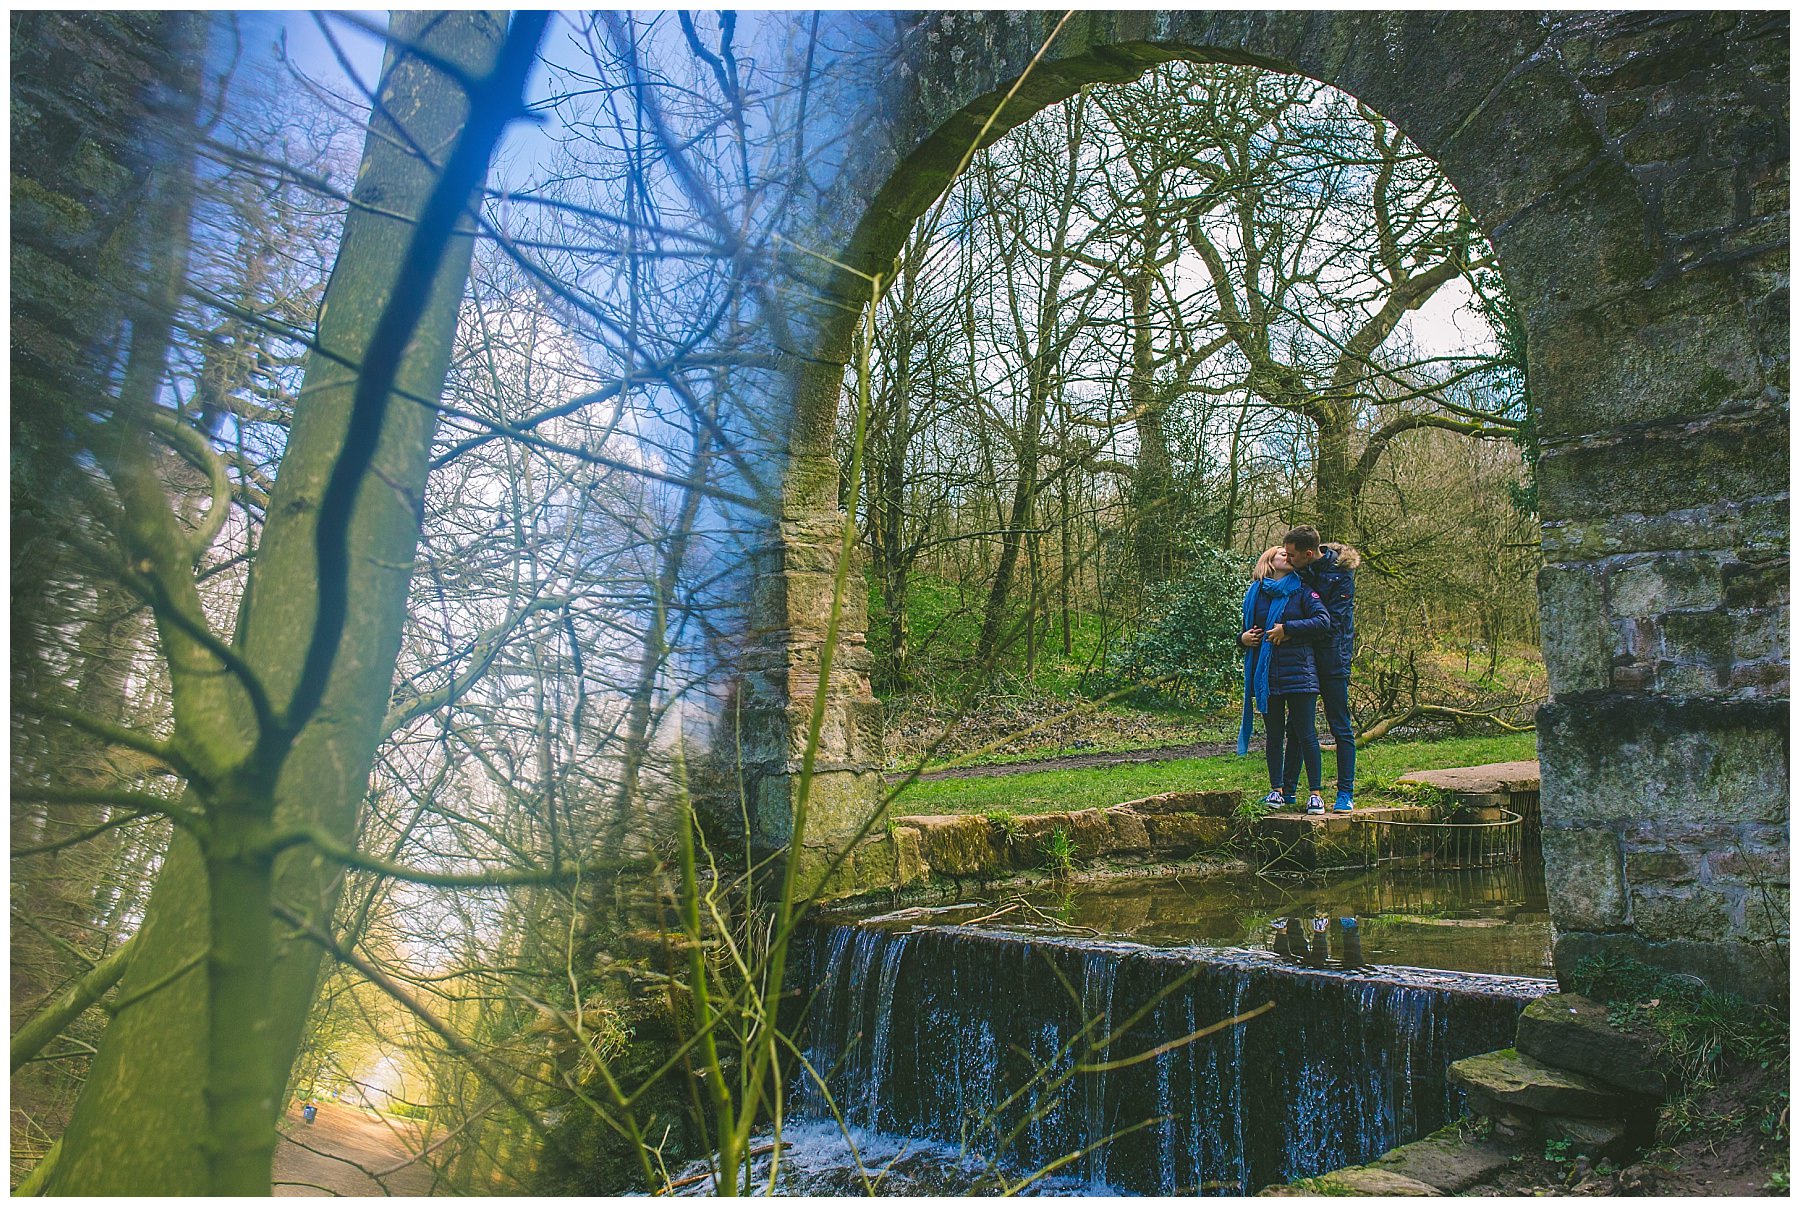 Preston couple share a kiss under an archway